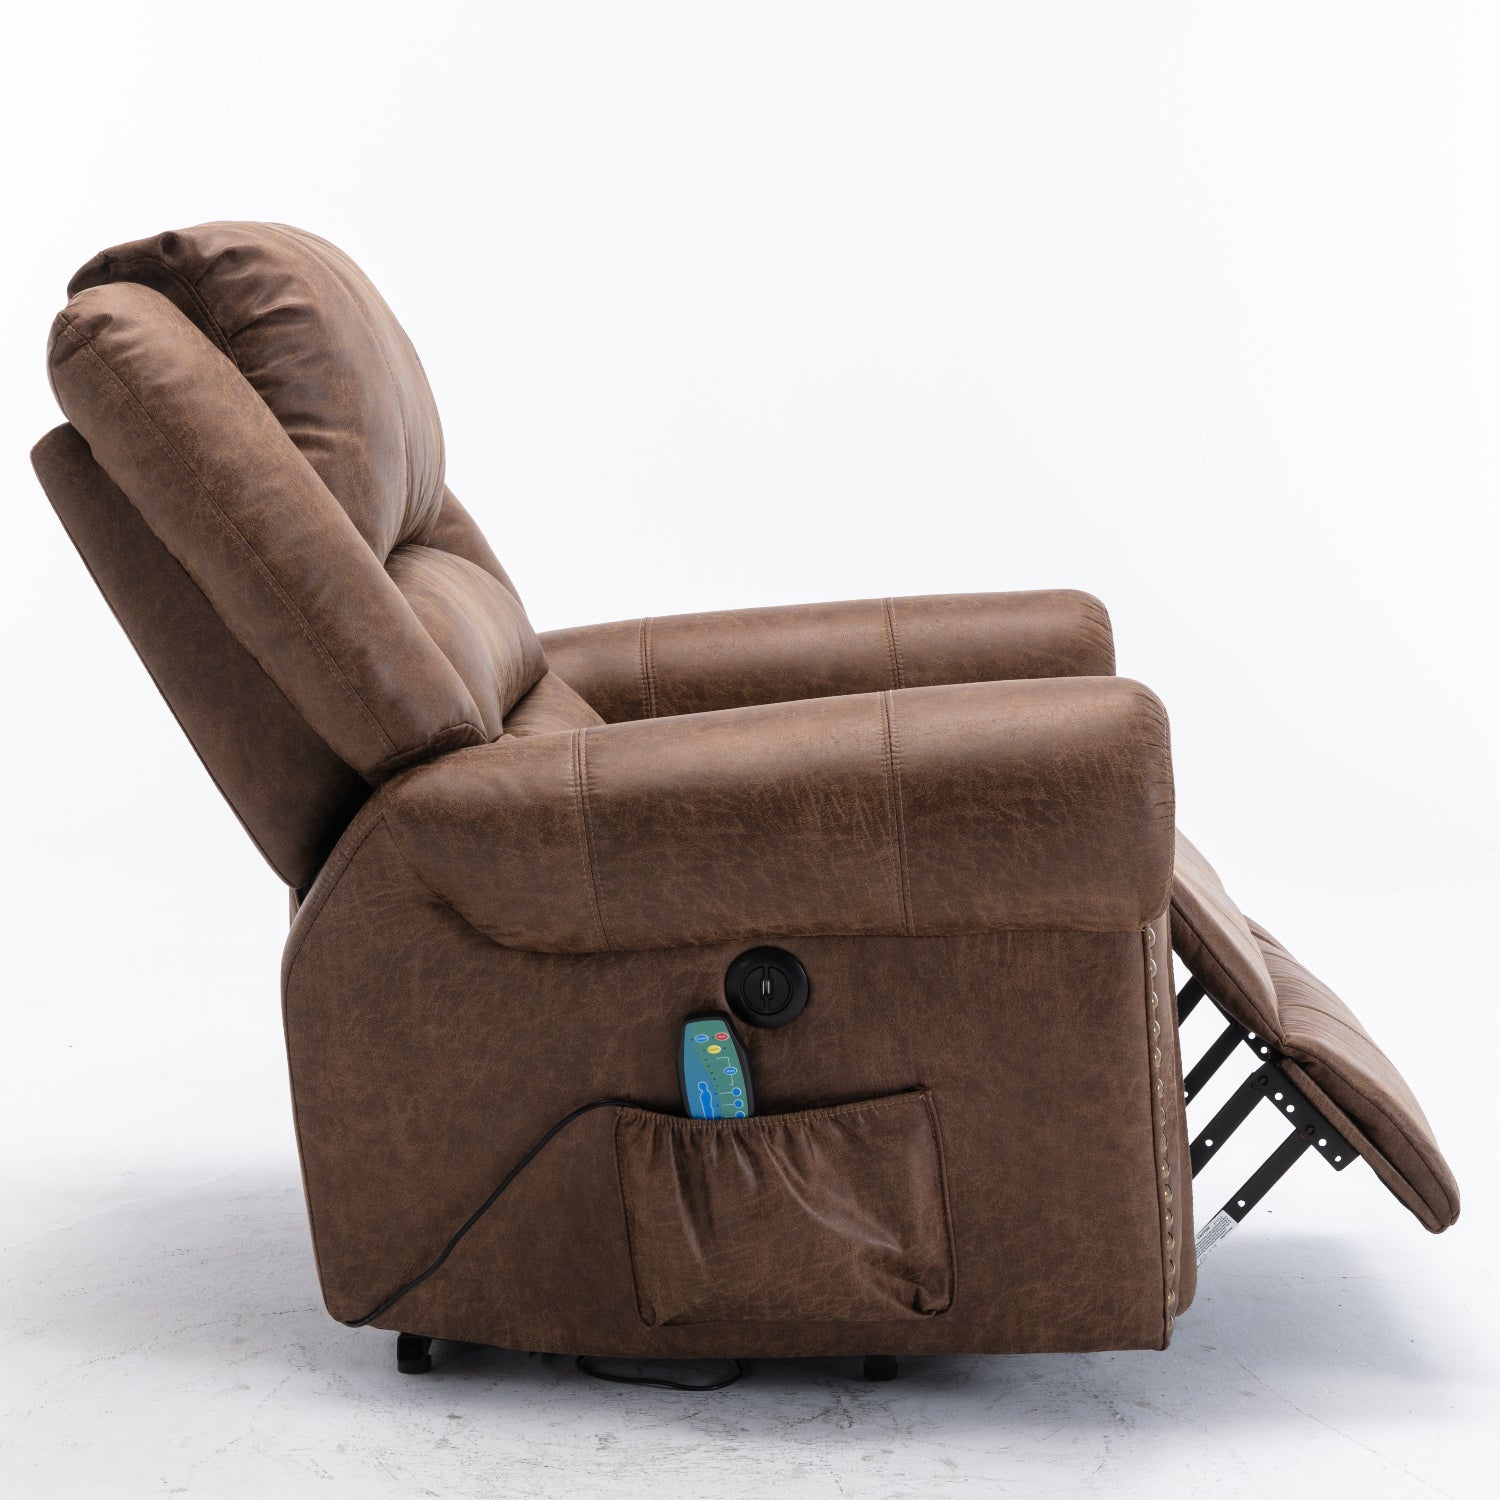 Nut Brown Power Lift Recliner Chair with Massage and Heat, partially reclined, side view